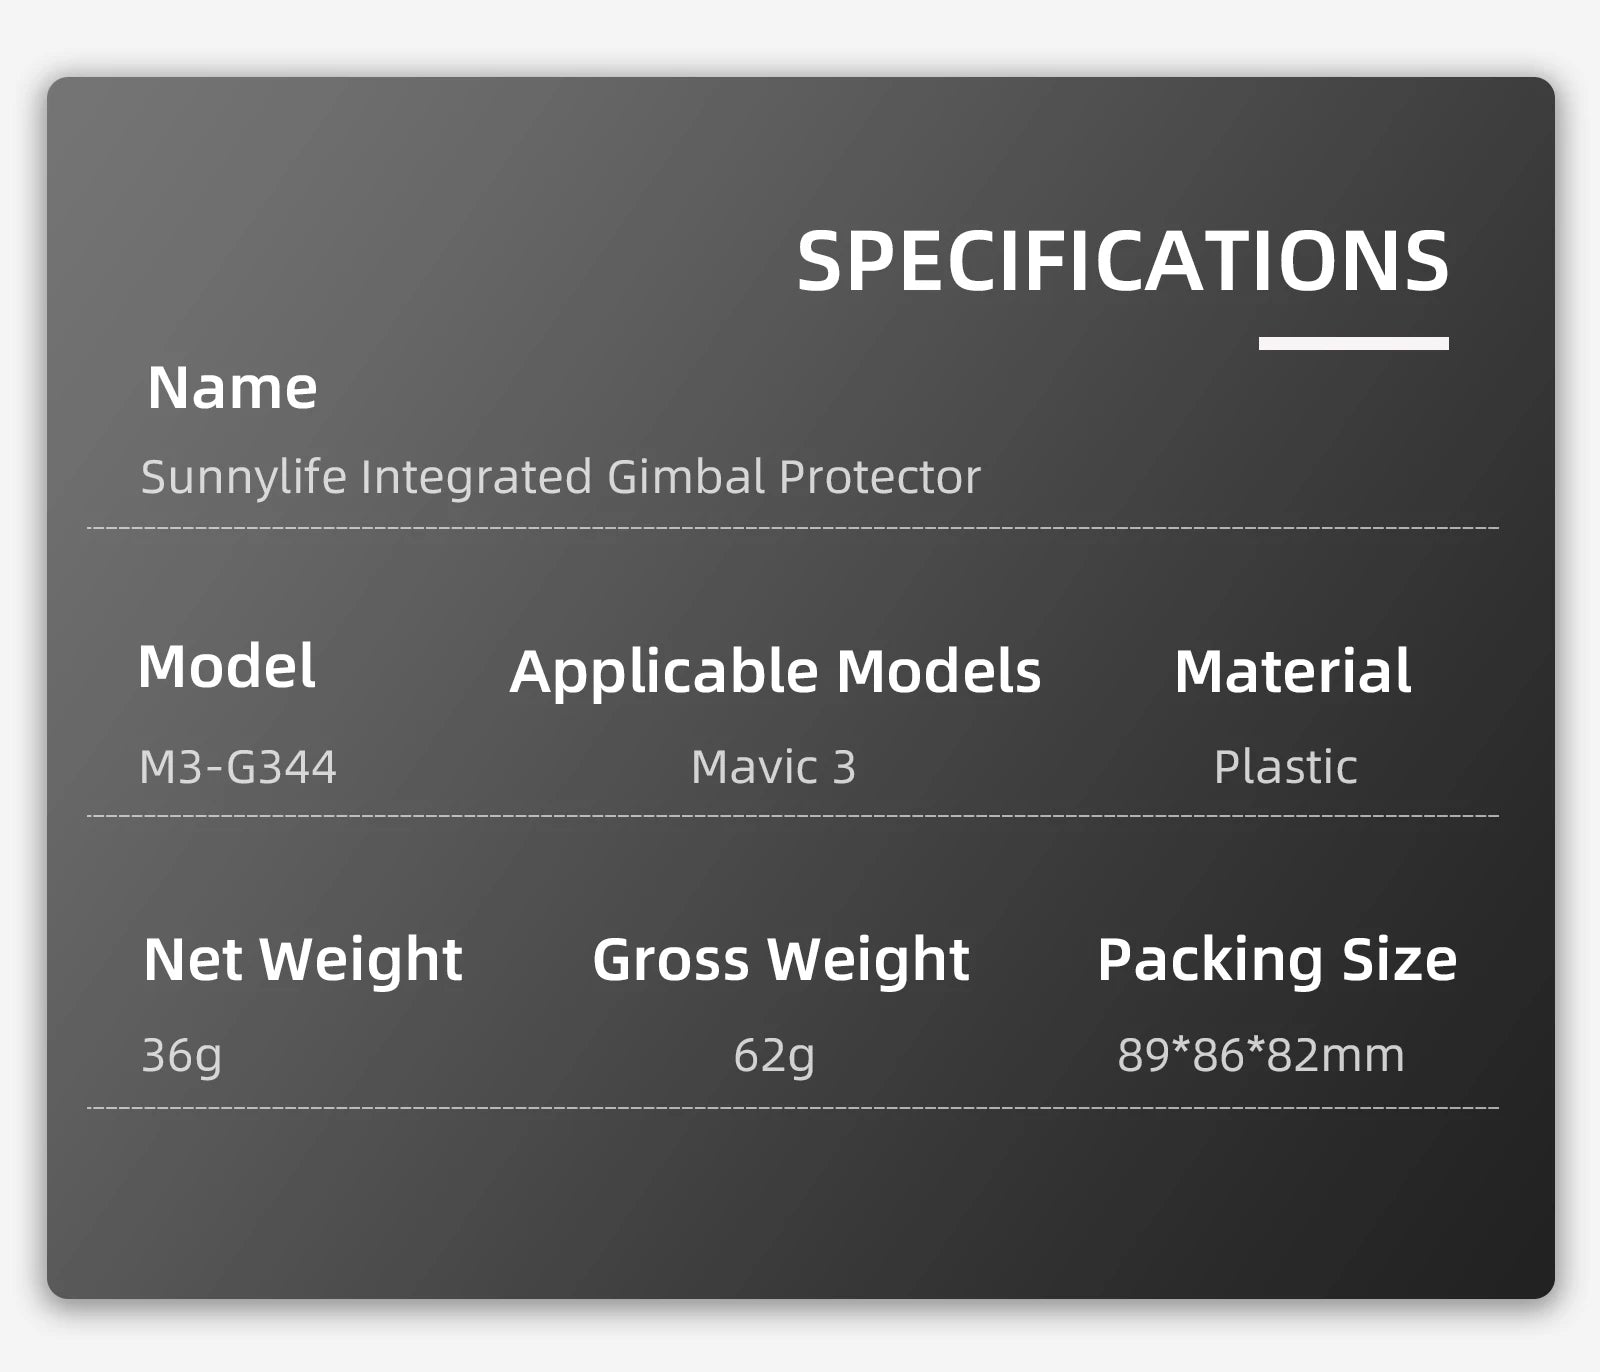 SPECIFICATIONS Name Sunnylife Integrated Gimbal Protector Model Applic